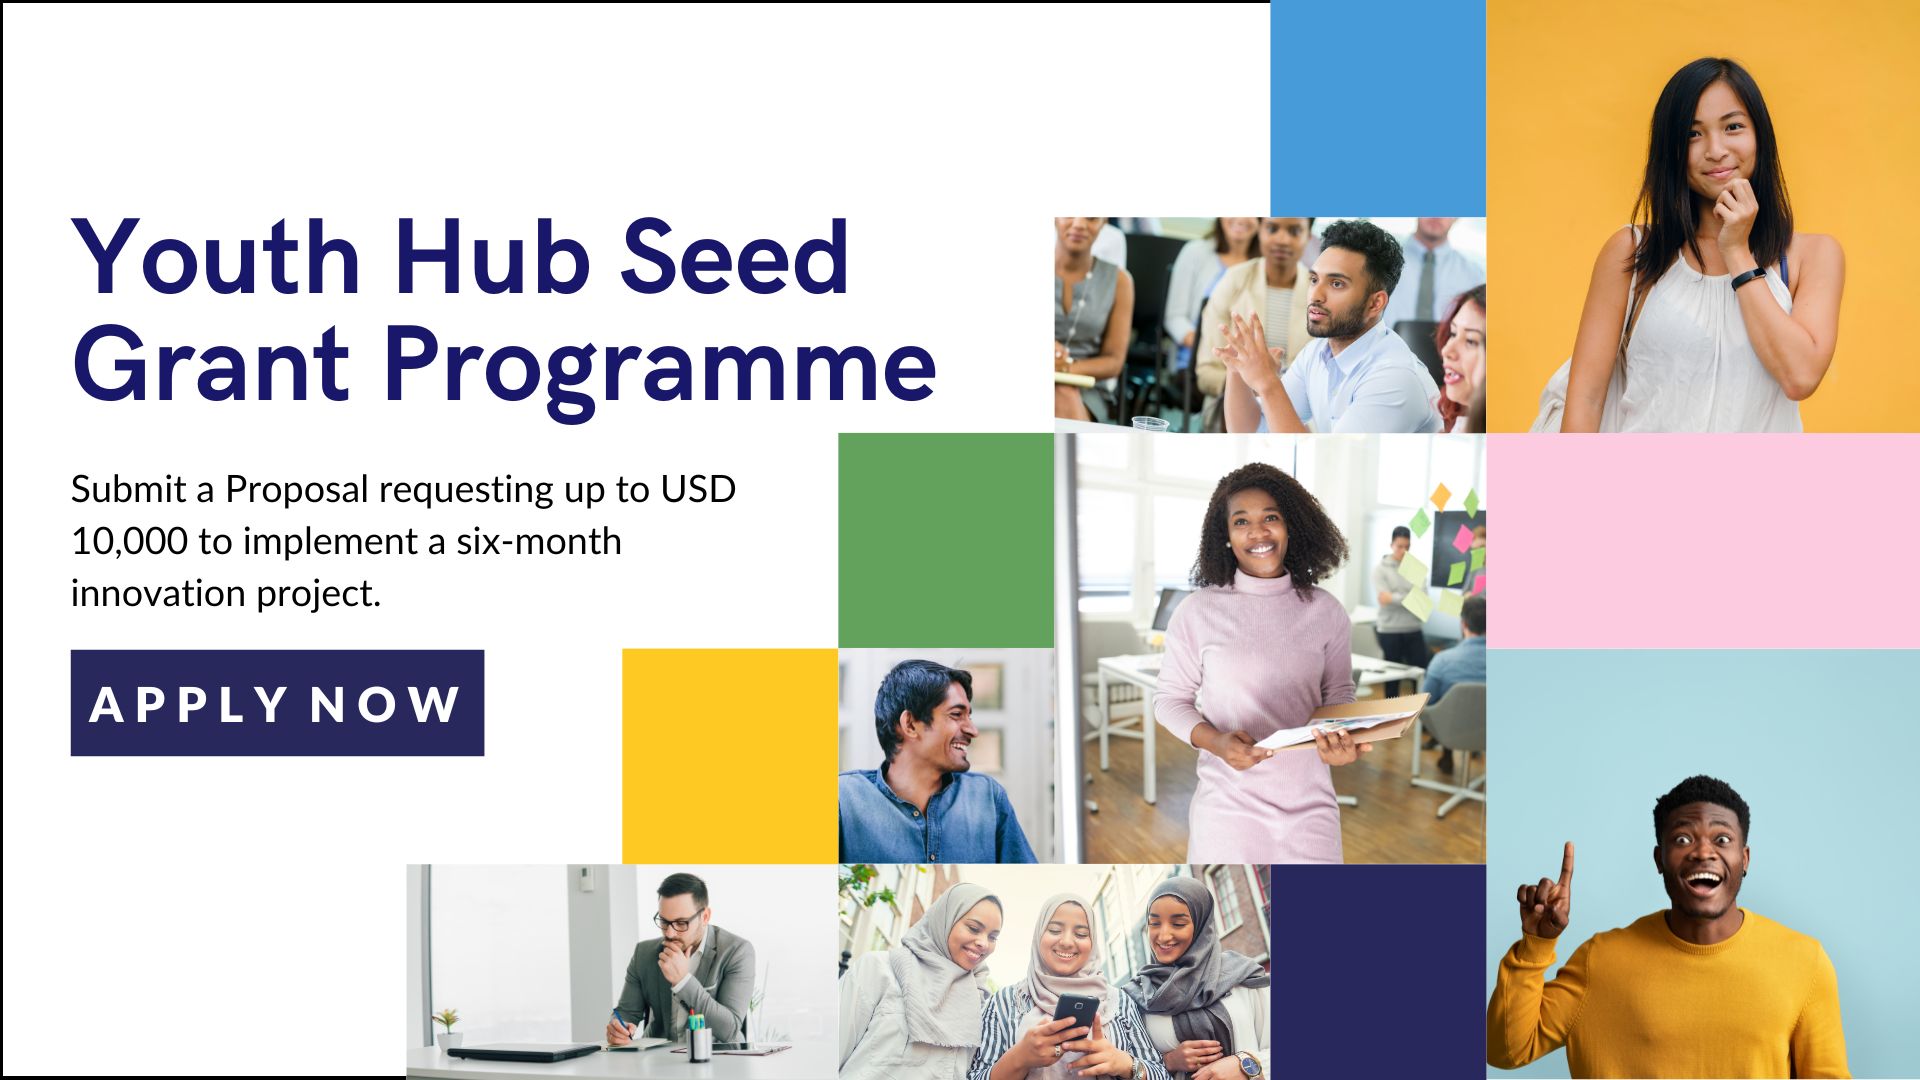 2022 Youth Hub Seed Grant Programme (up to USD 10,000)